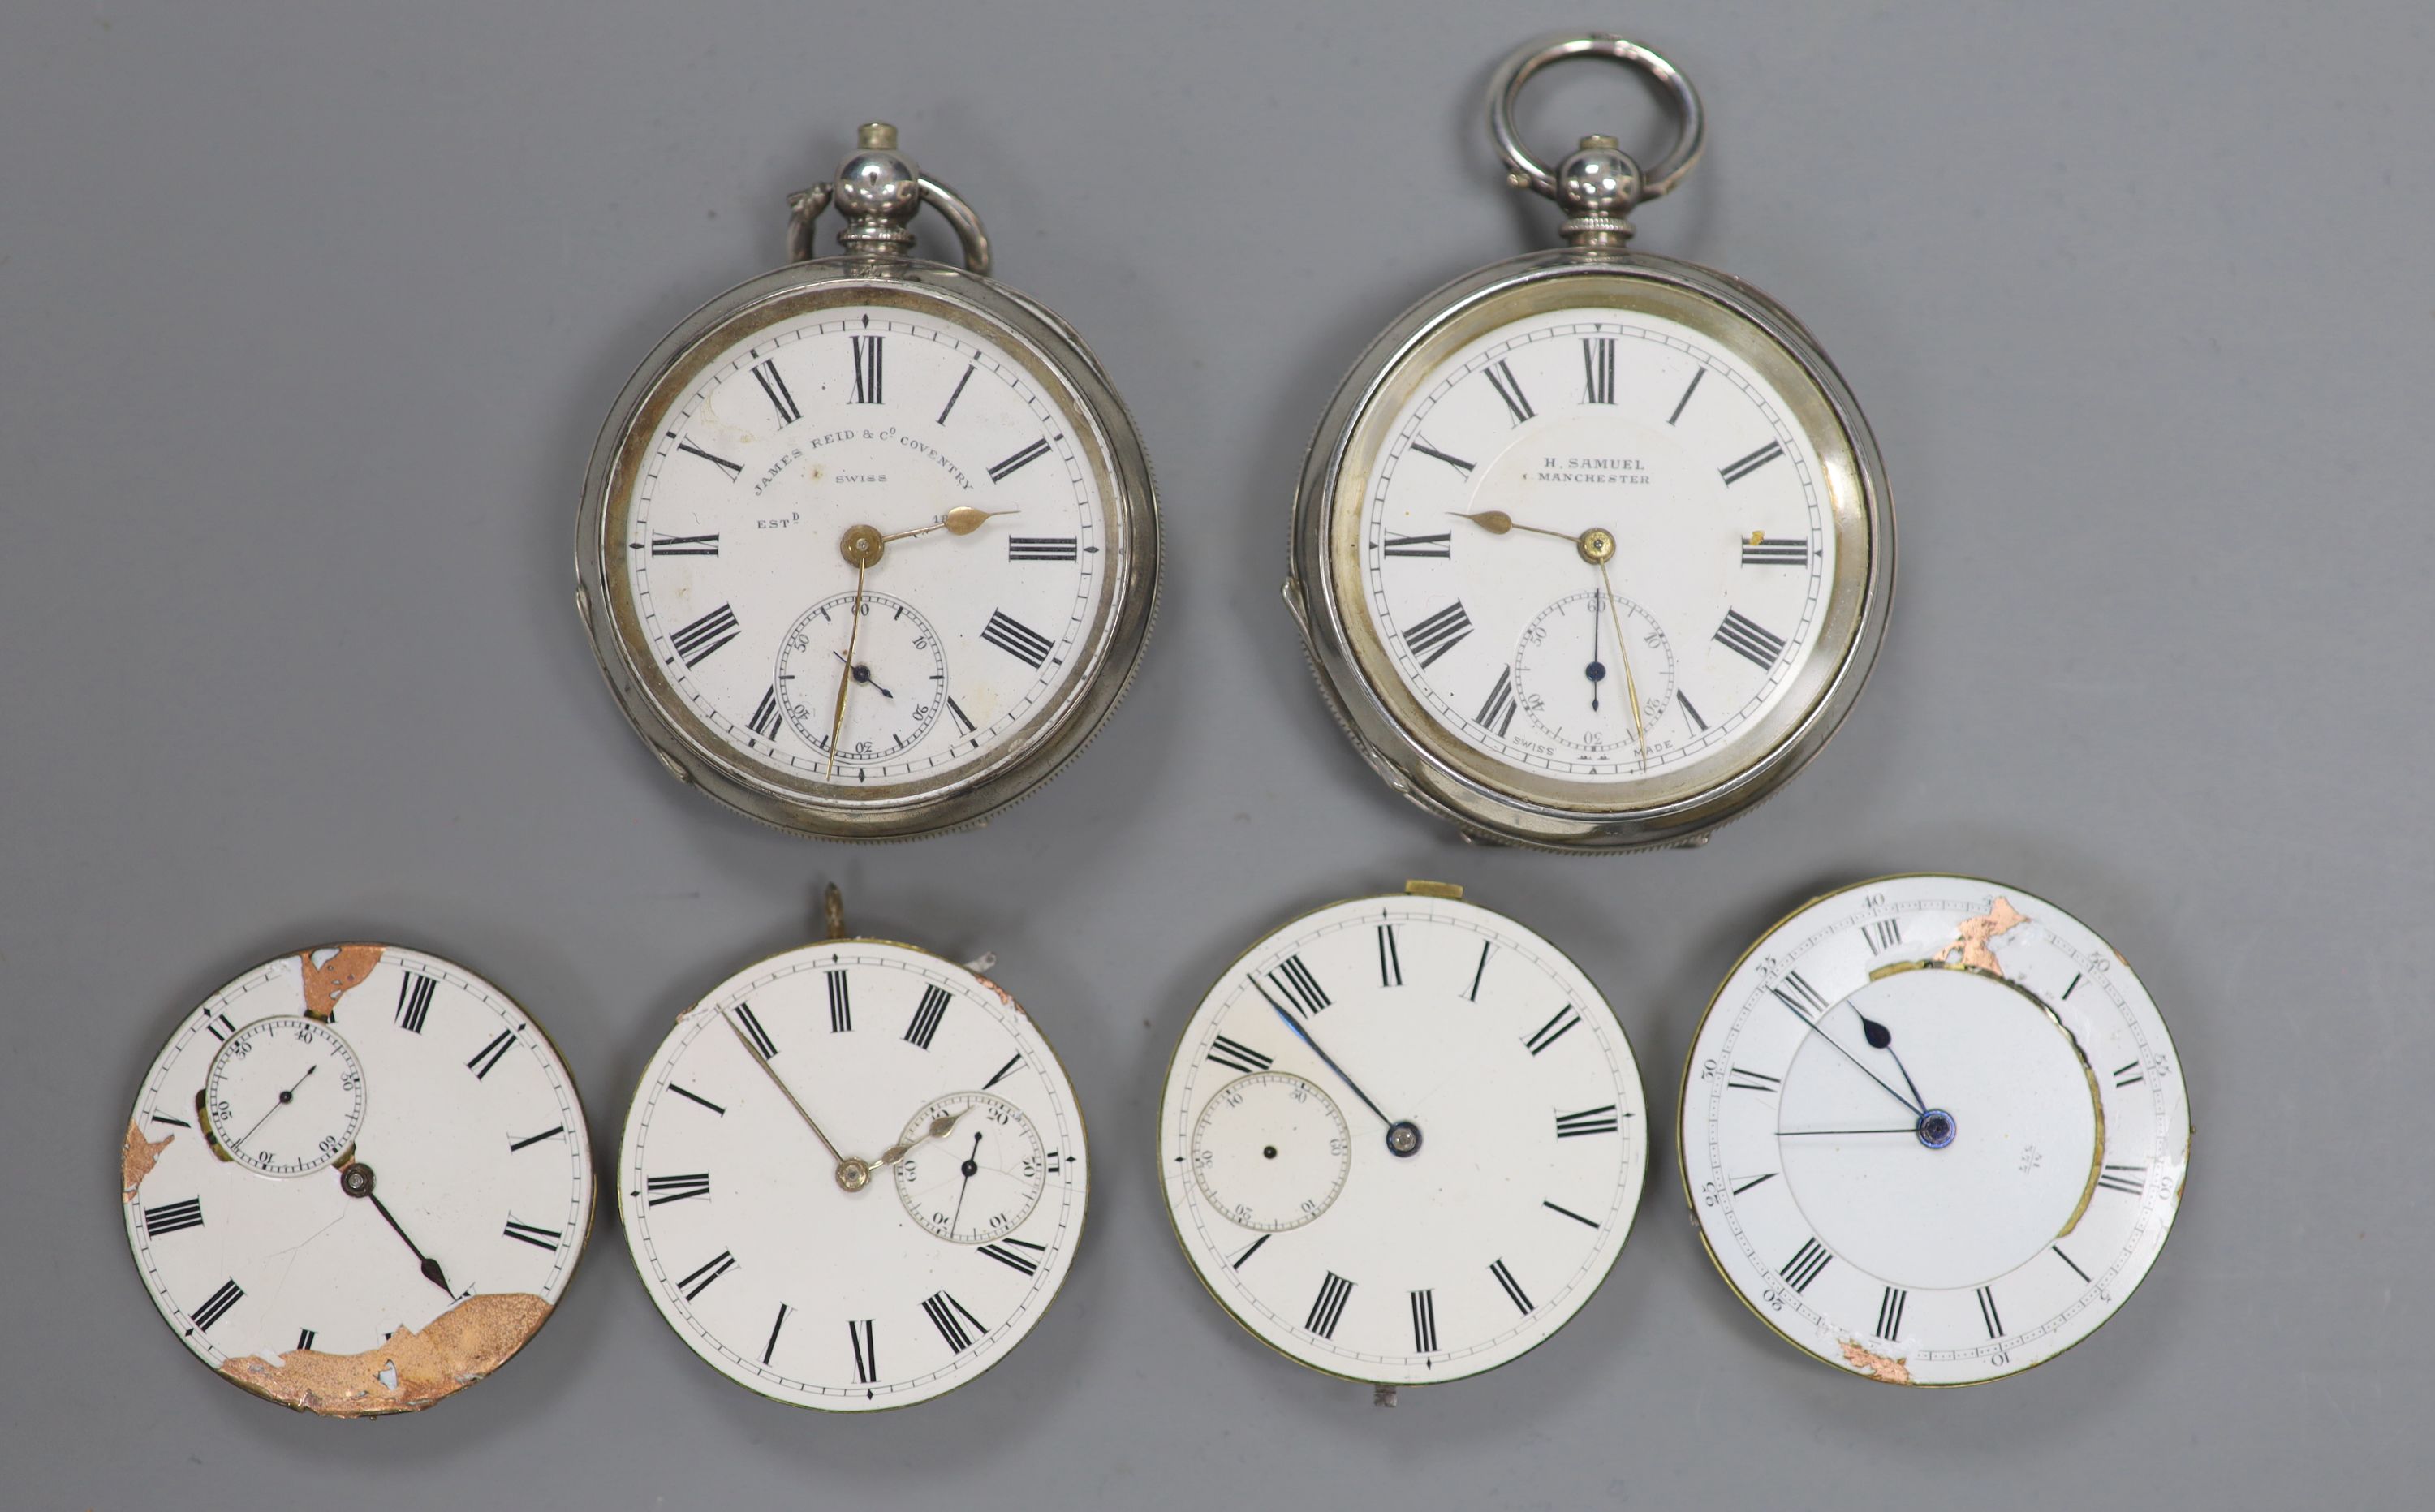 Two early 20th century silver or white metal pocket watches and four assorted pocket watch